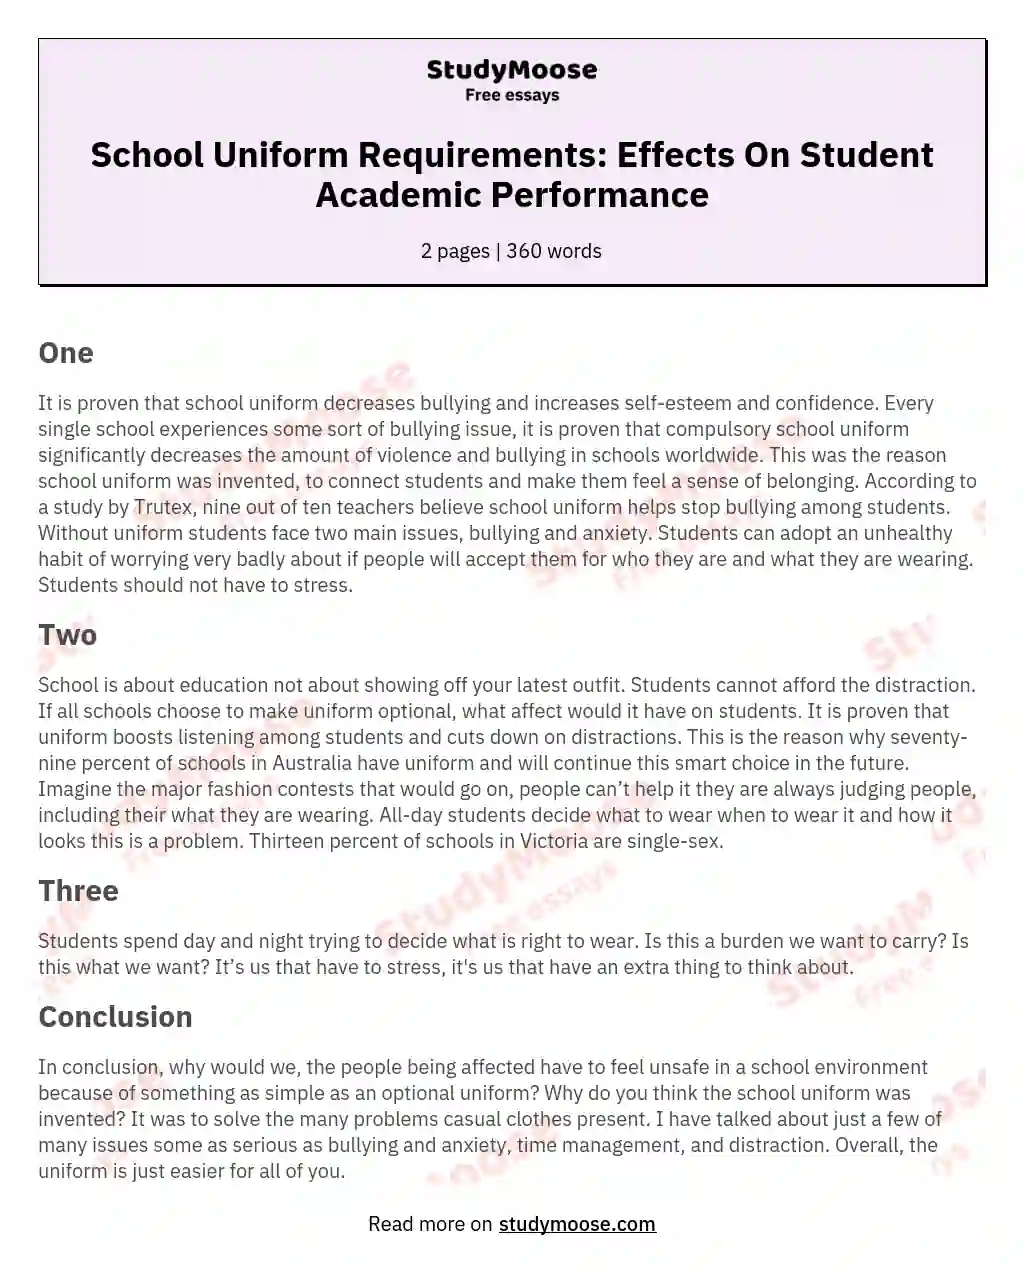 School Uniform Requirements: Effects On Student Academic Performance